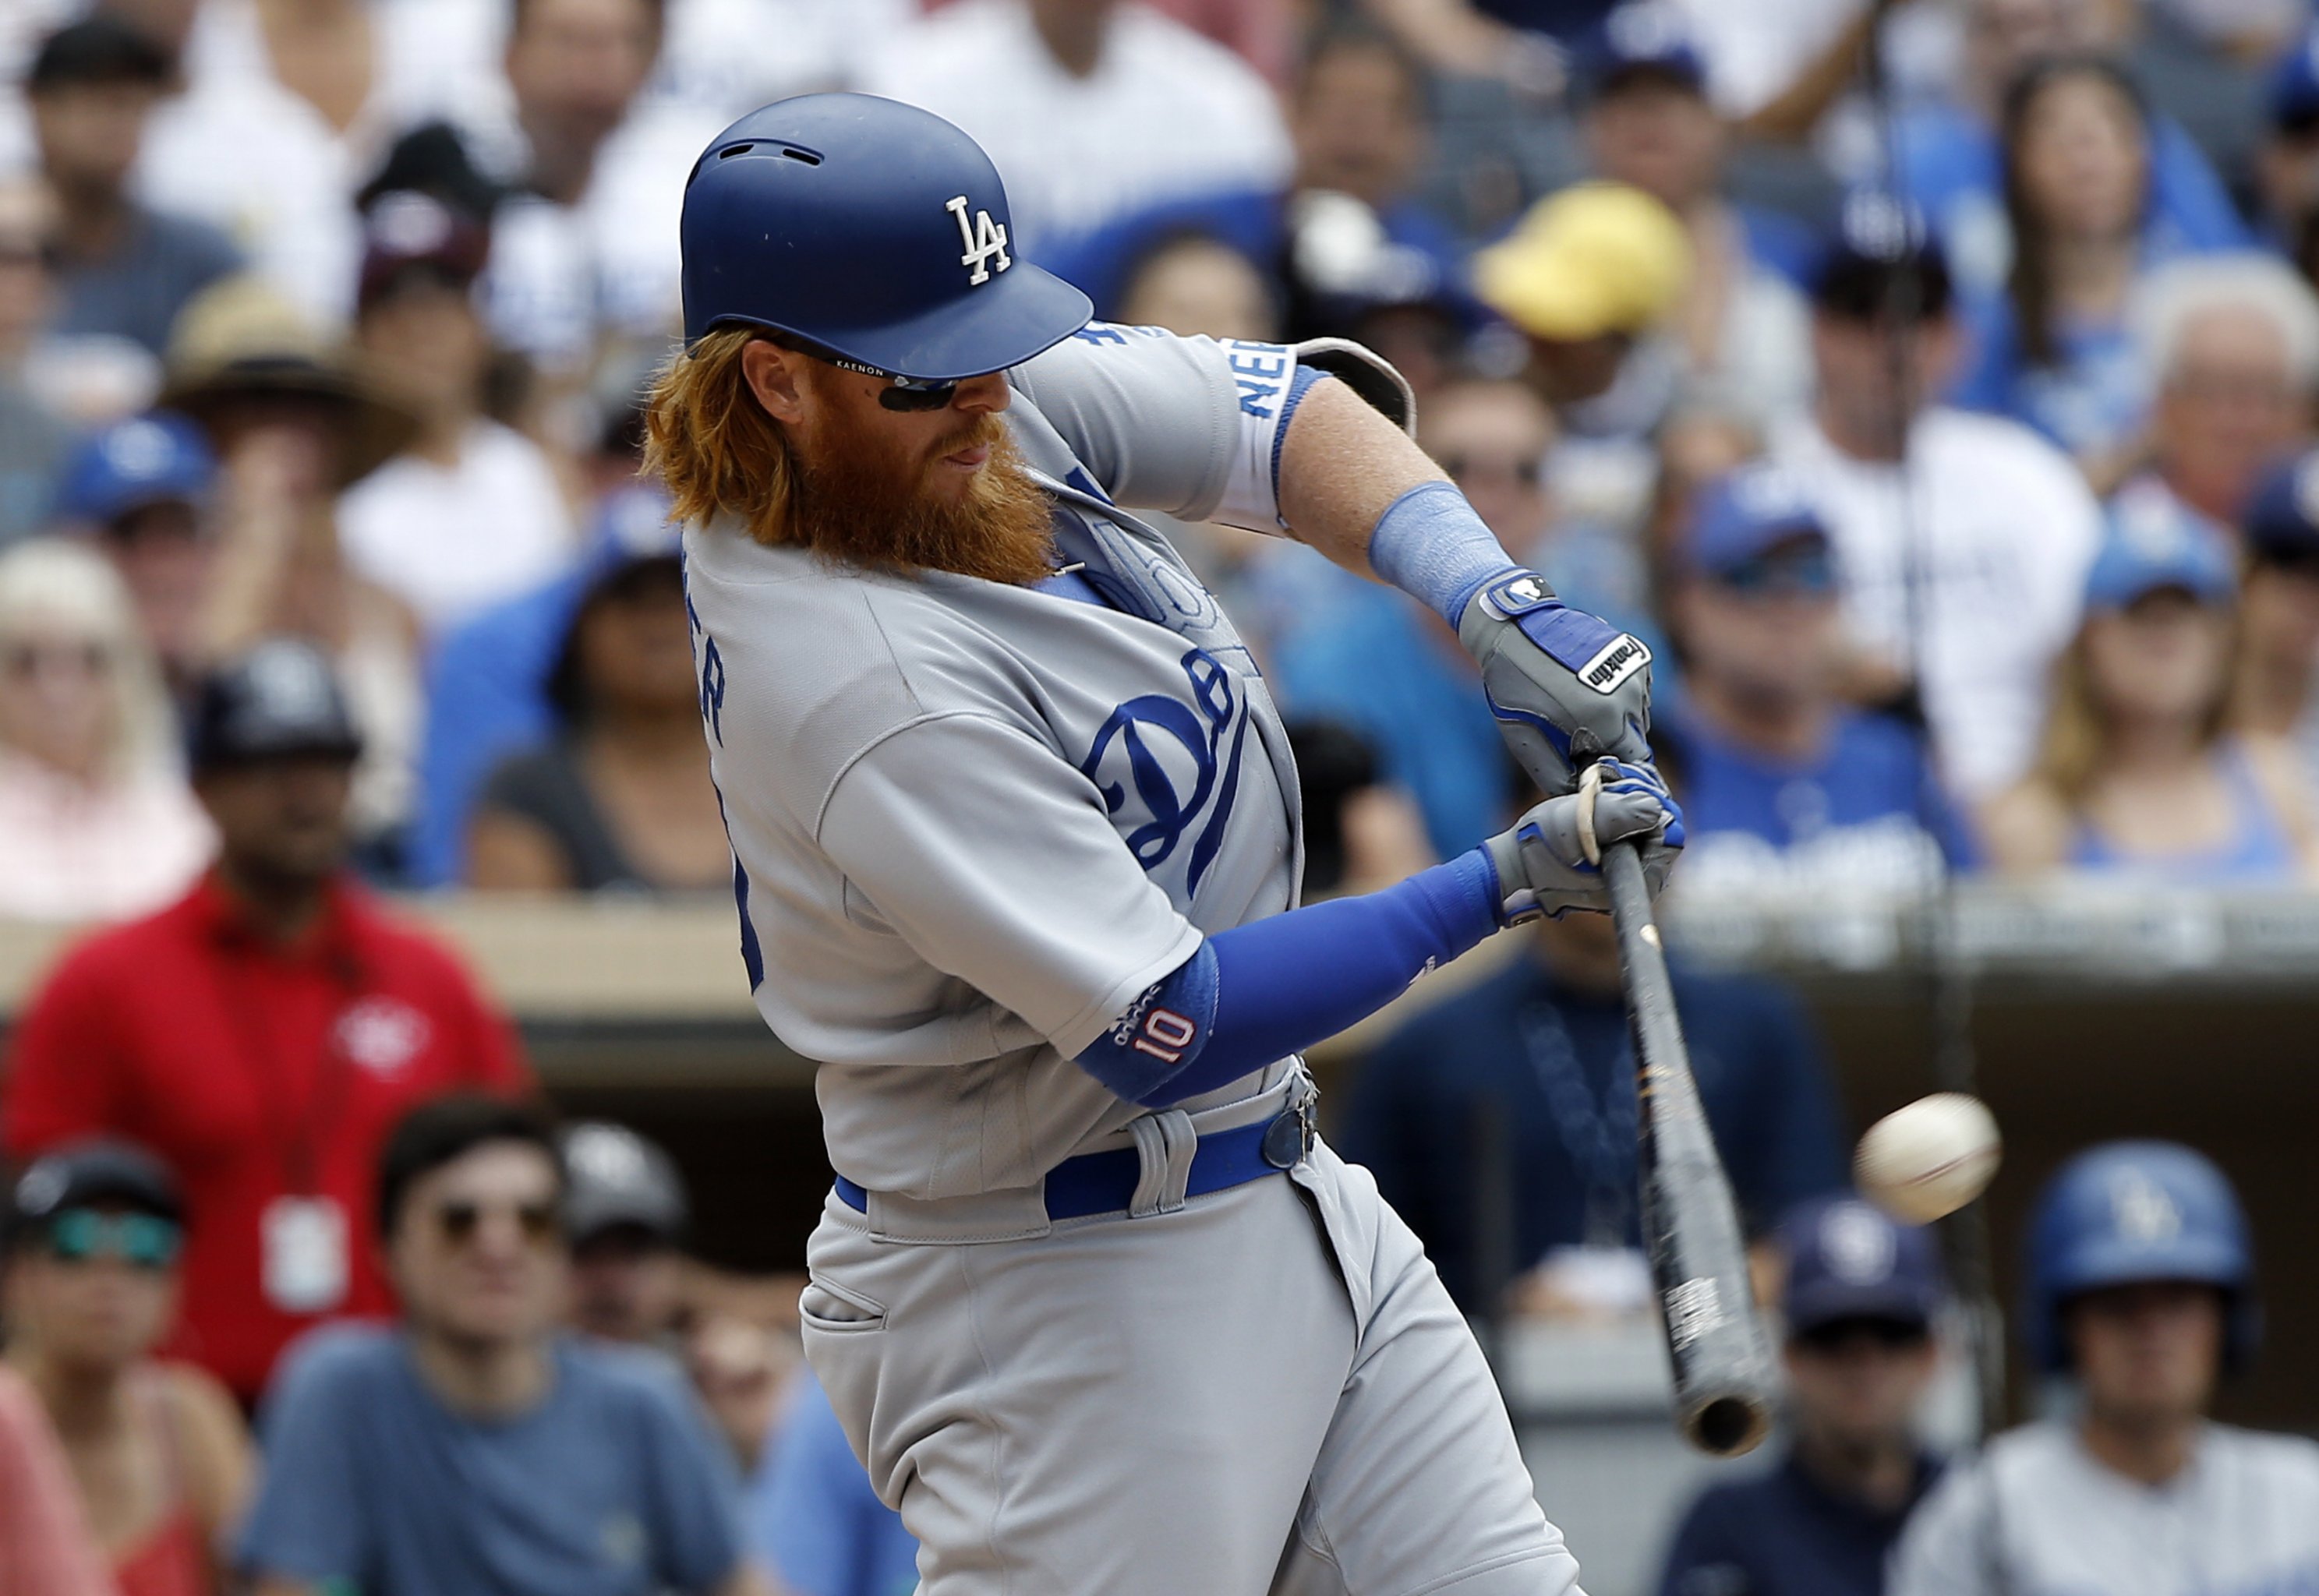 There's a simple reason why Justin Turner has a stain on his Dodgers jersey